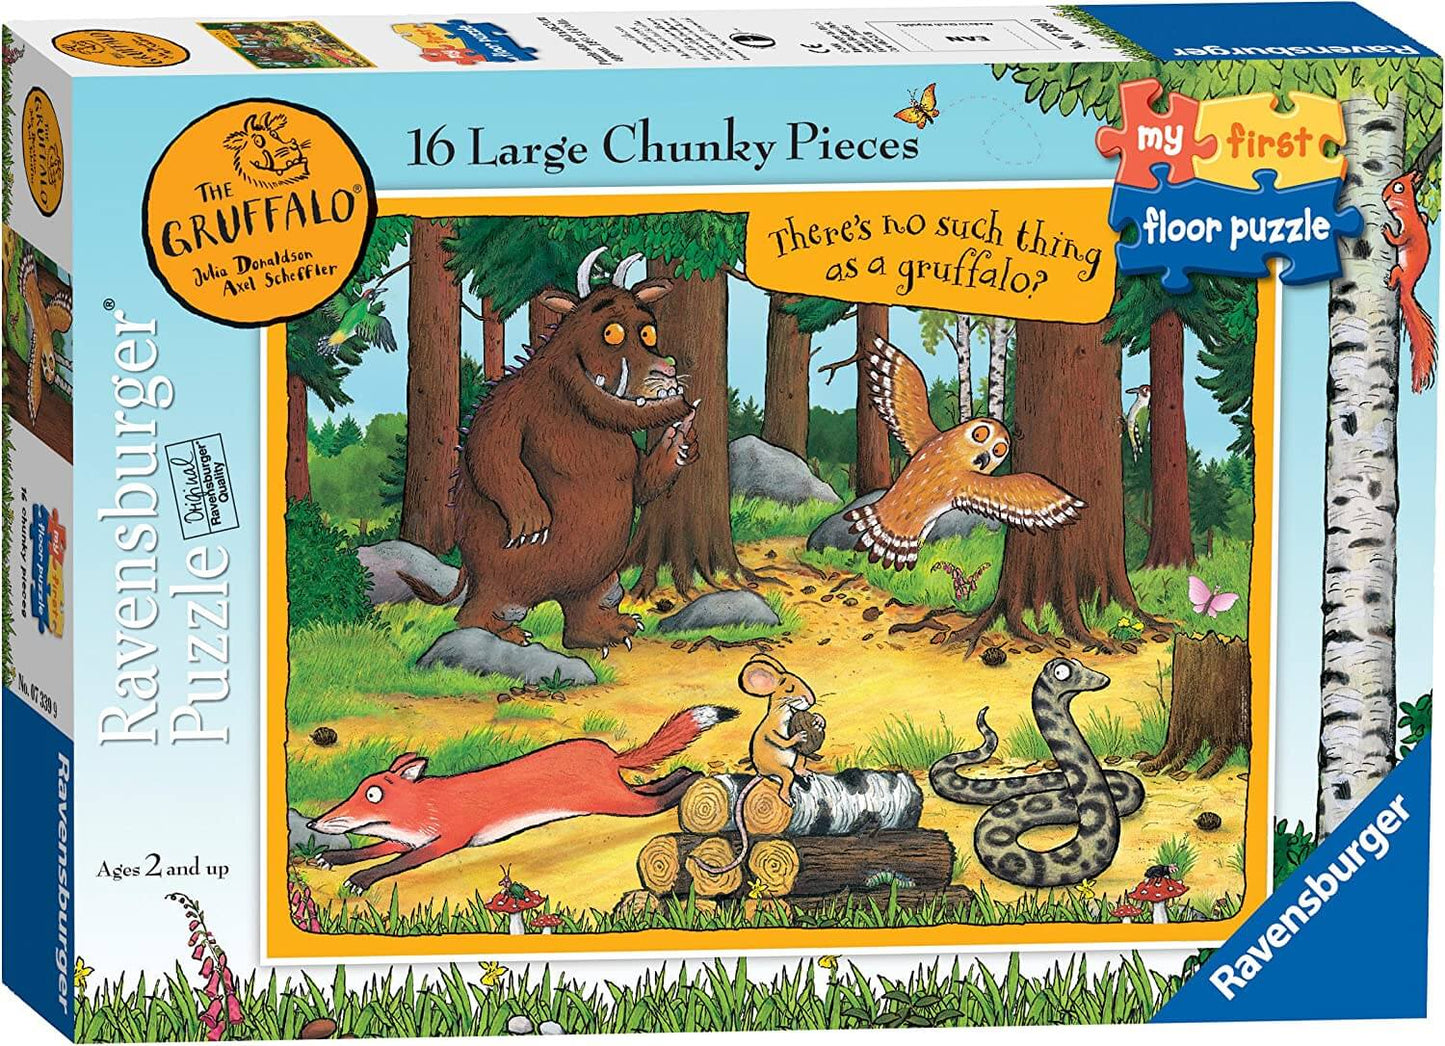 Ravensburger The Gruffalo - My First Floor Puzzle 16 Piece